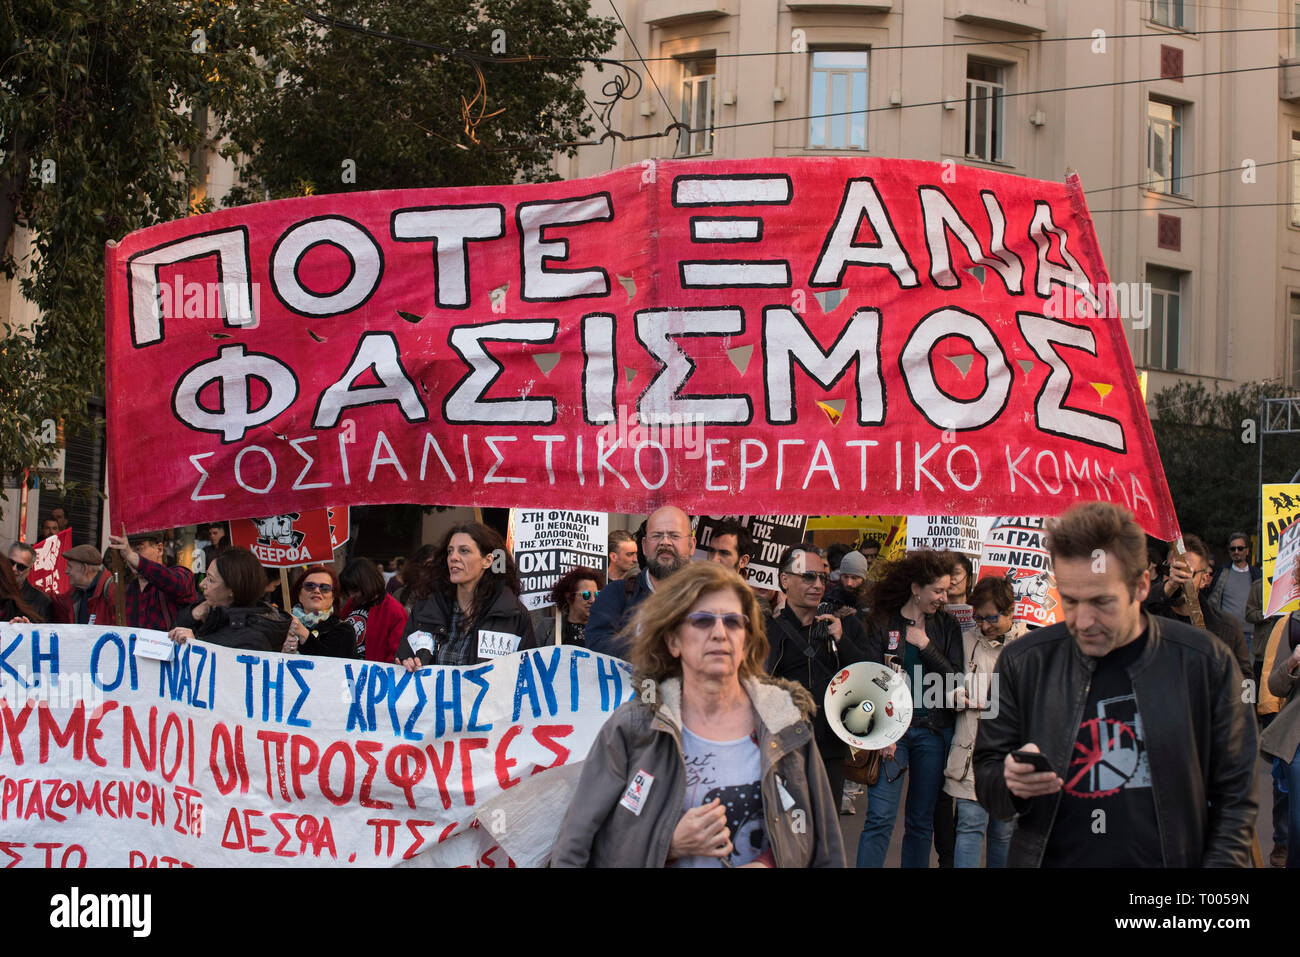 Athens, Greece. 16th March 2019. A banner reads, 'Never again fascism', as locals, migrants and refugees hold placards and shout slogans against racism and closed borders. Leftist and anti-racist organizations staged a rally on the occasion of the International Day against racism to demonstrate against discrimination and racist policies and behaviours. © Nikolas Georgiou / Alamy Live News Stock Photo